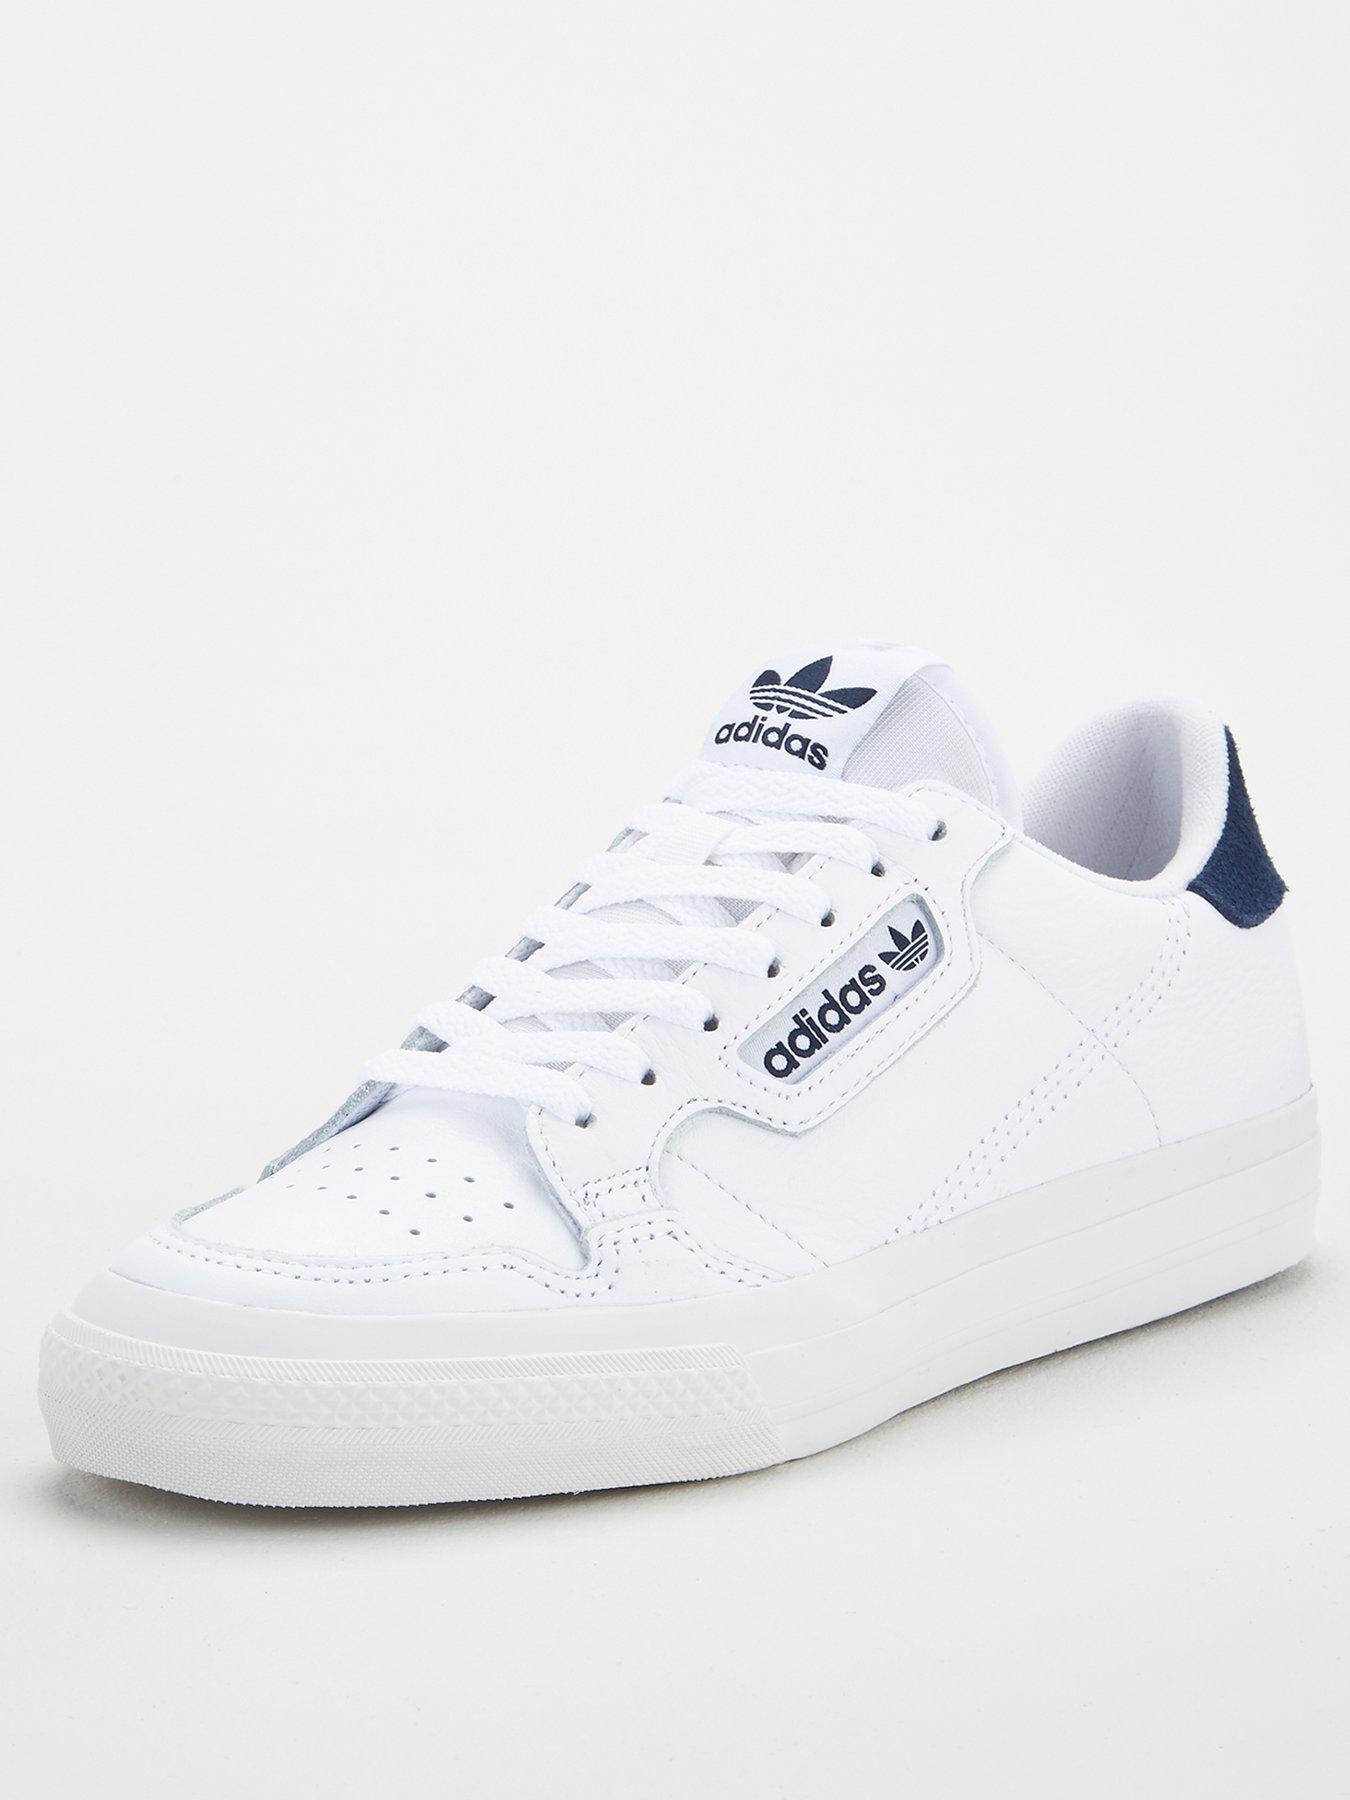 topshop mens trainers